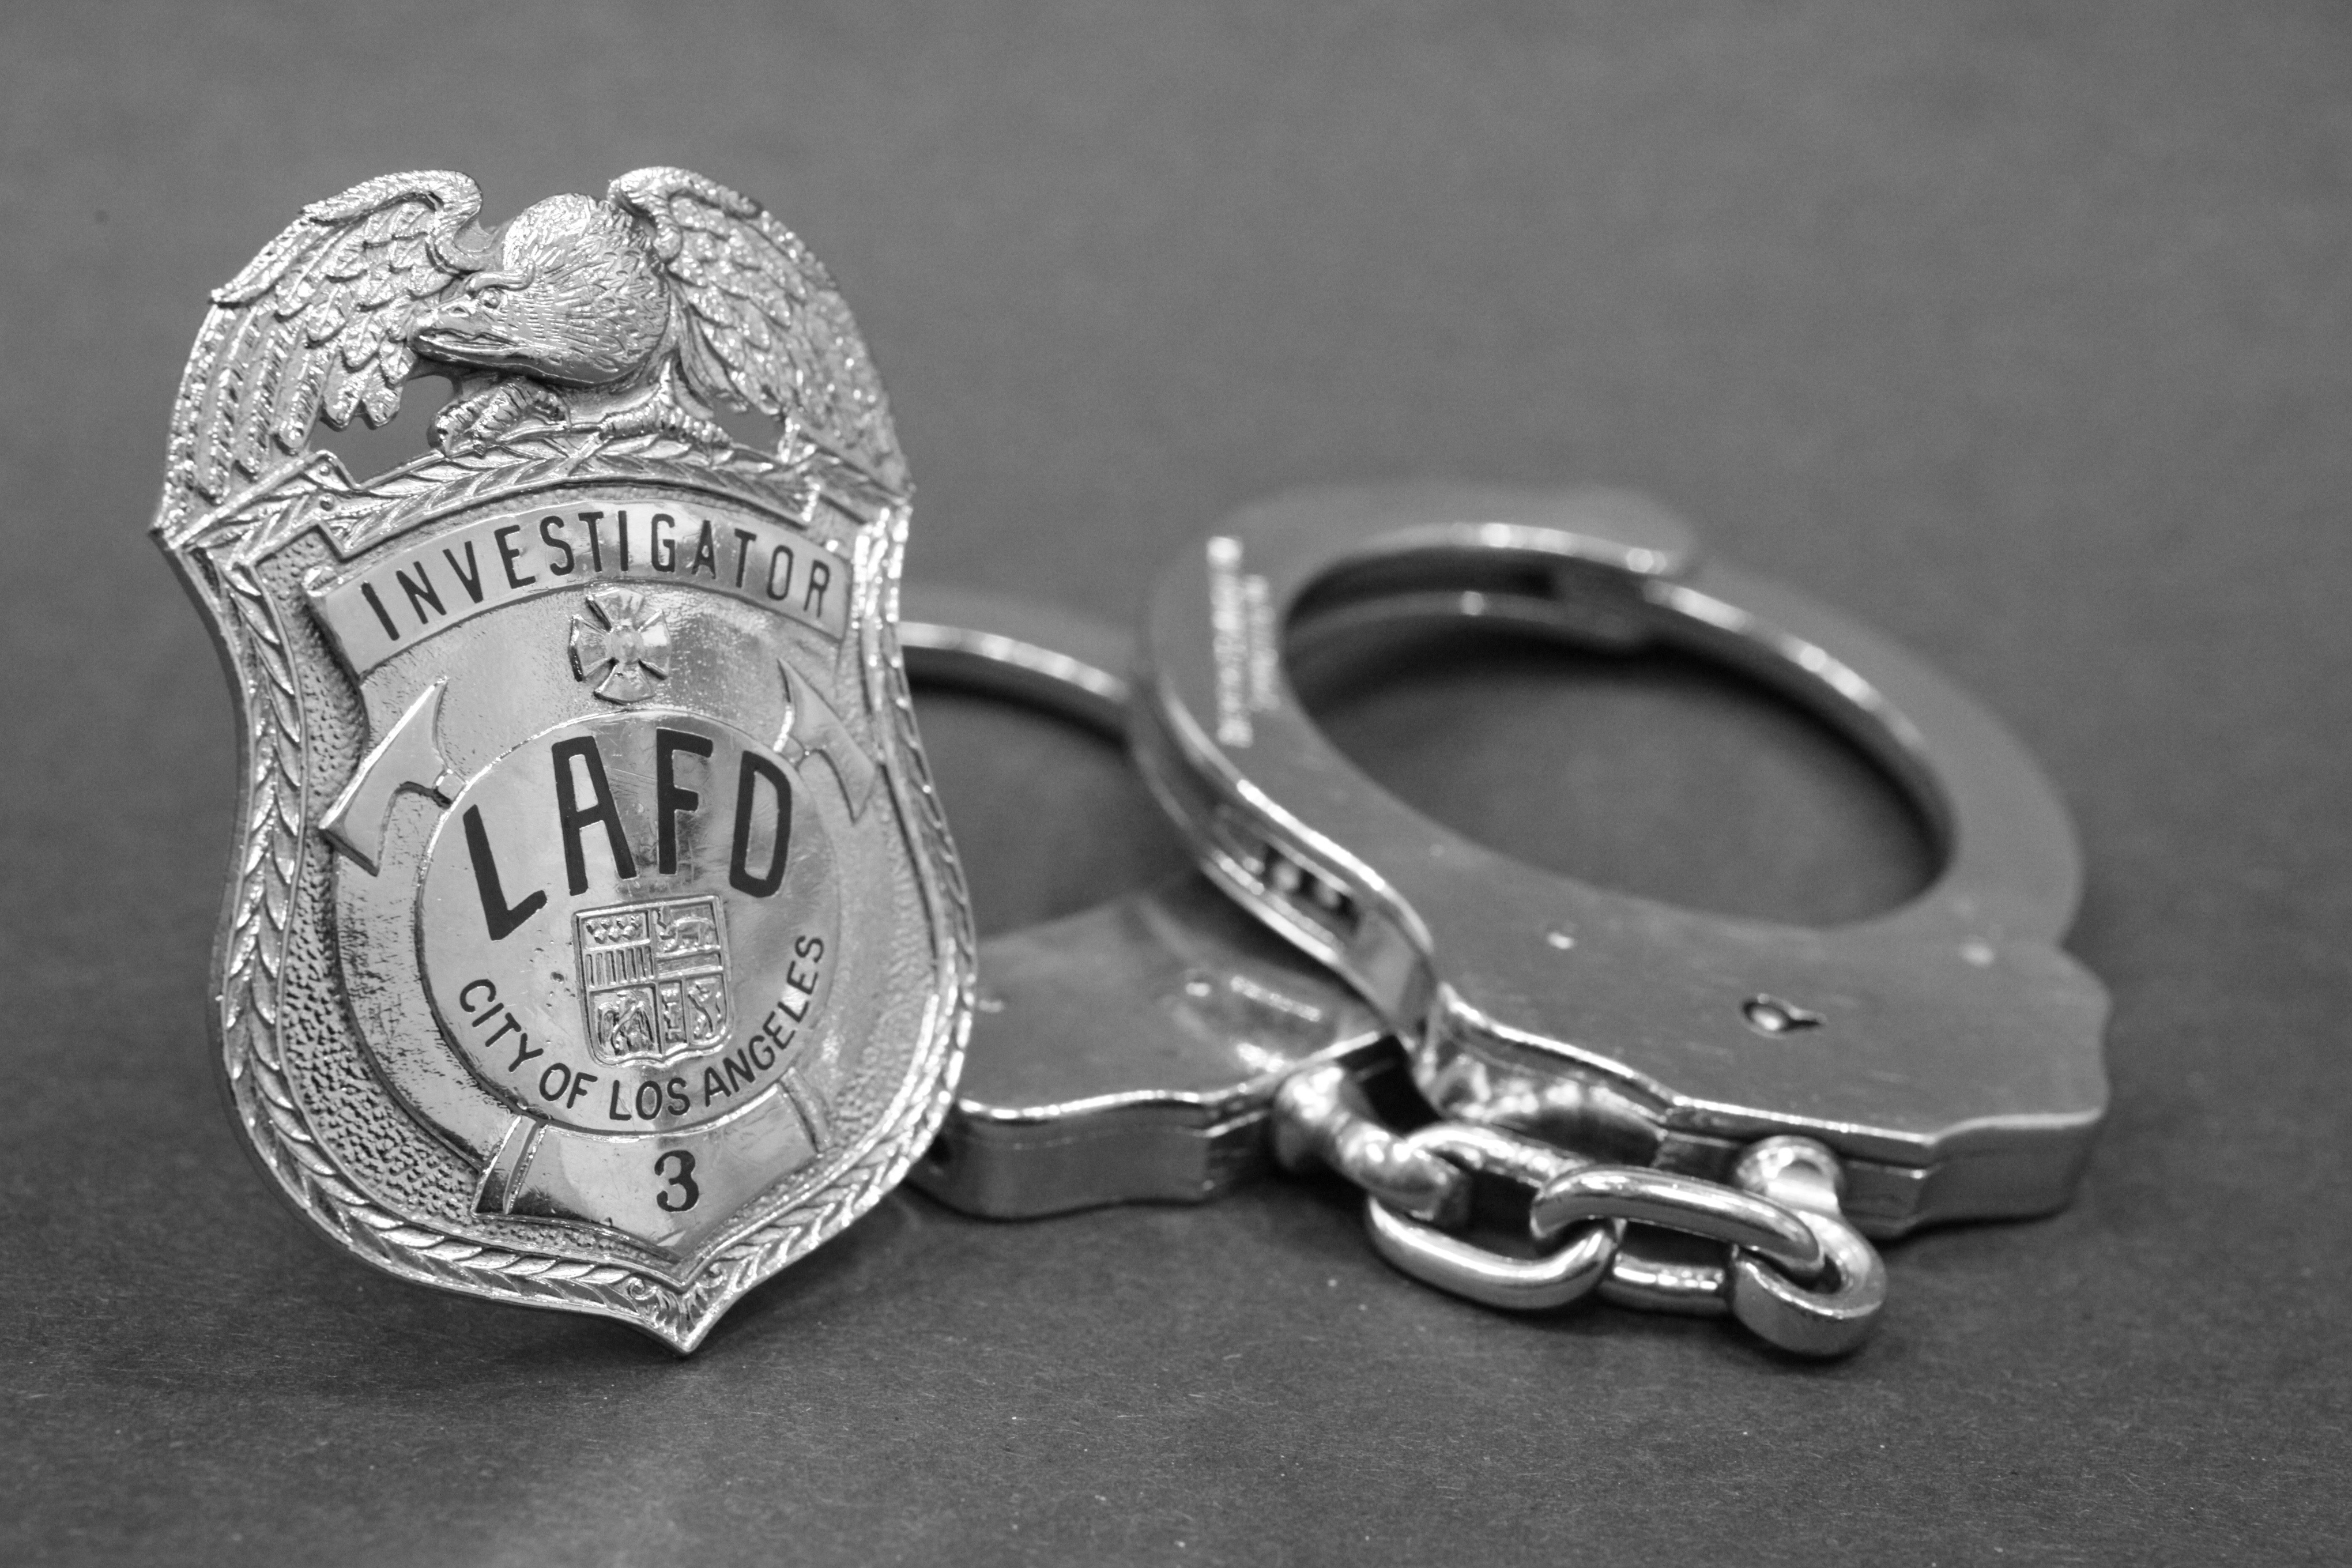 Stock Image: LAFD Investigator badge and pair of handcuffs